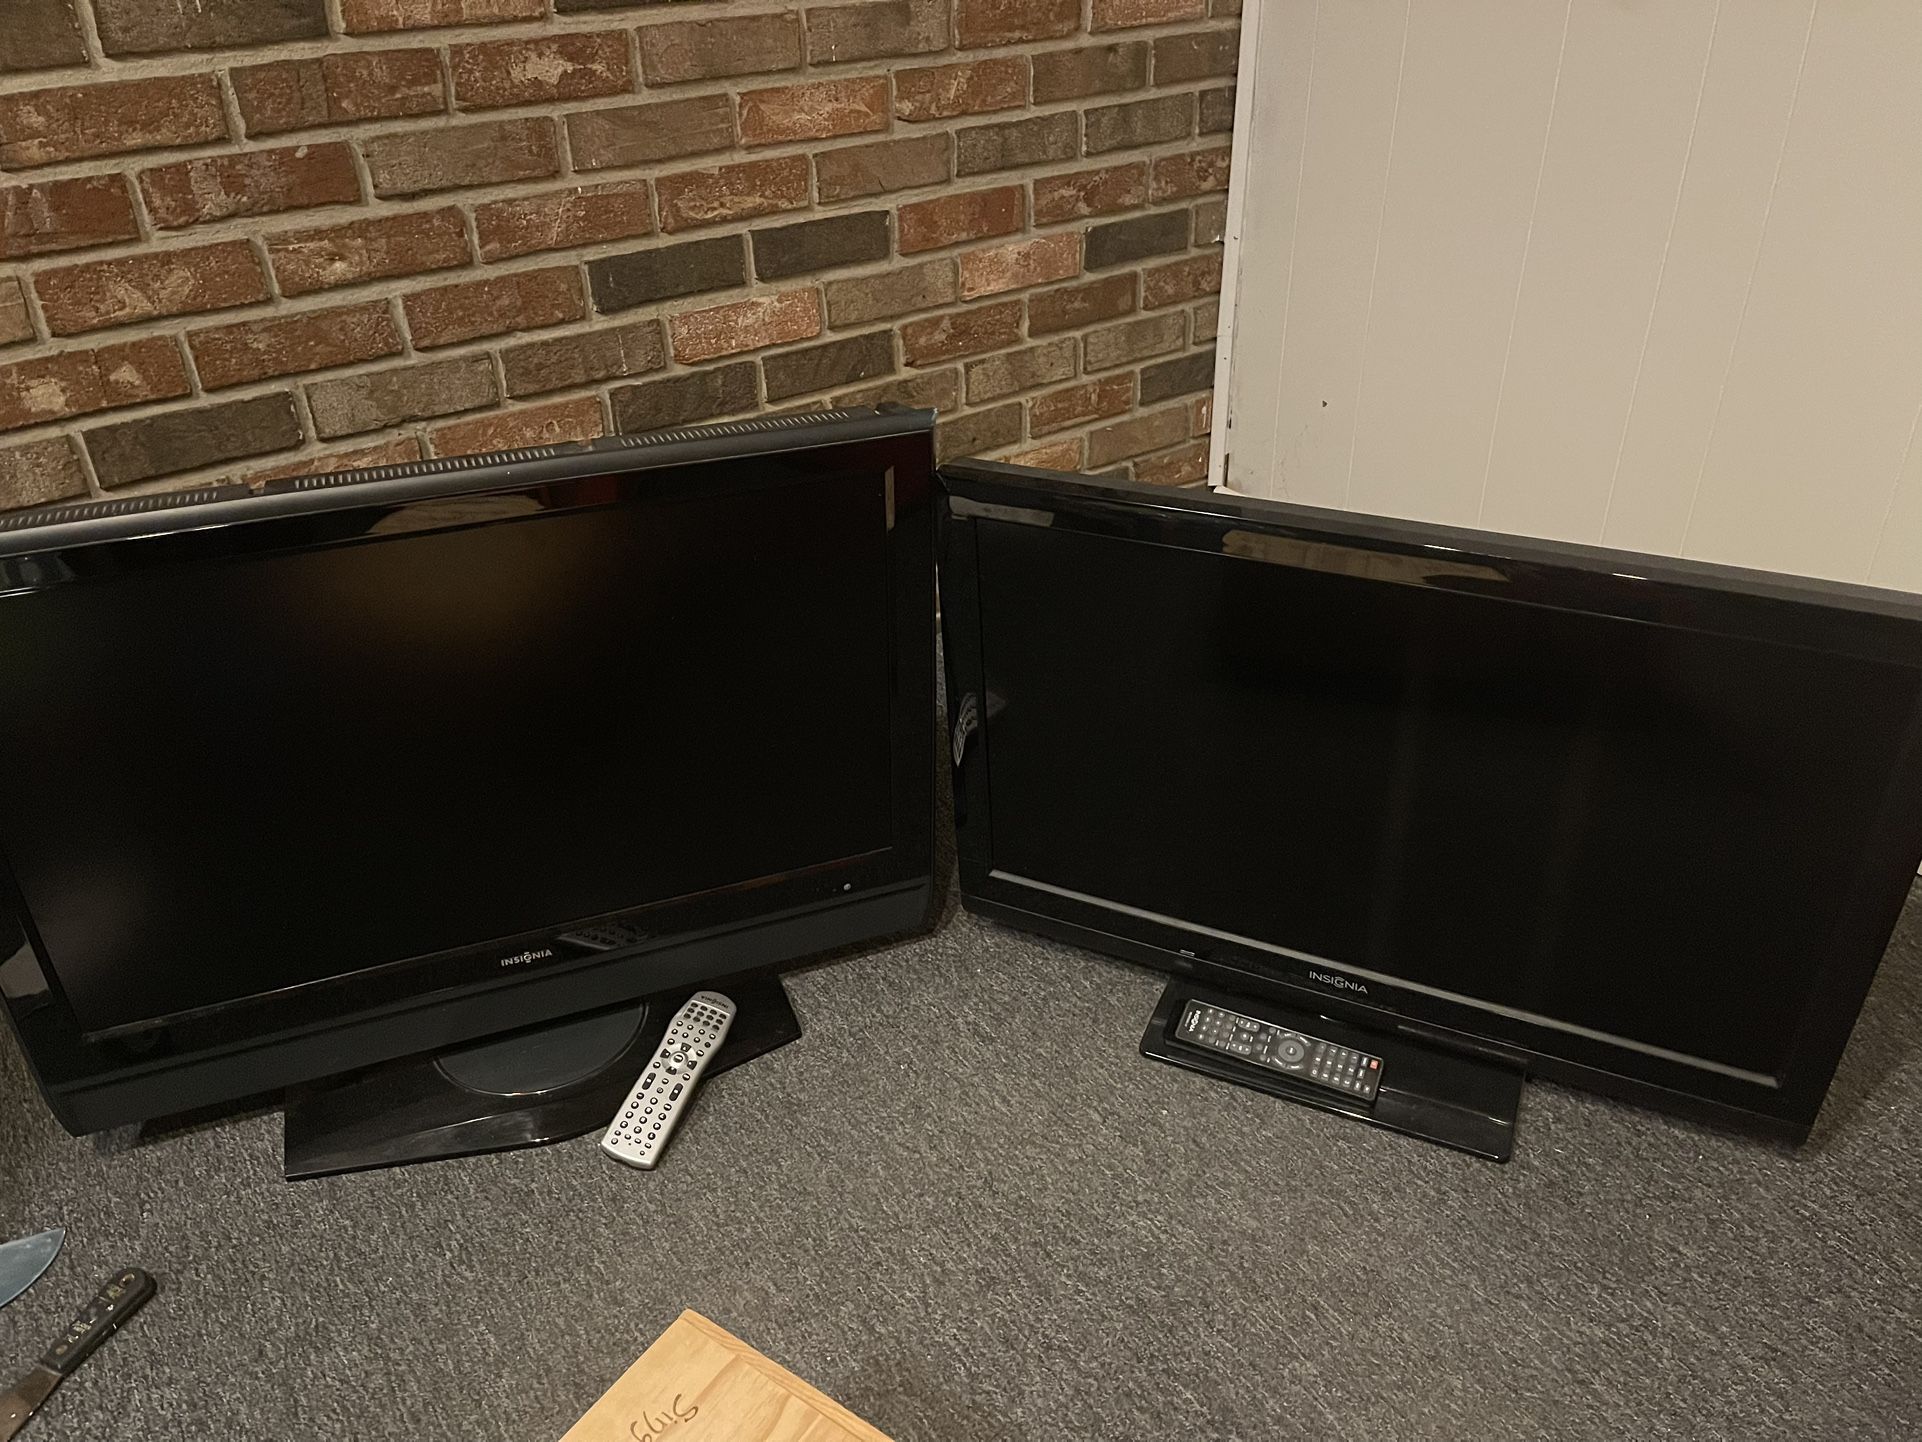 2 Insignia 32” TV Television Or Computer Monitor Both With Remote Control $25 Each Or Both For $40